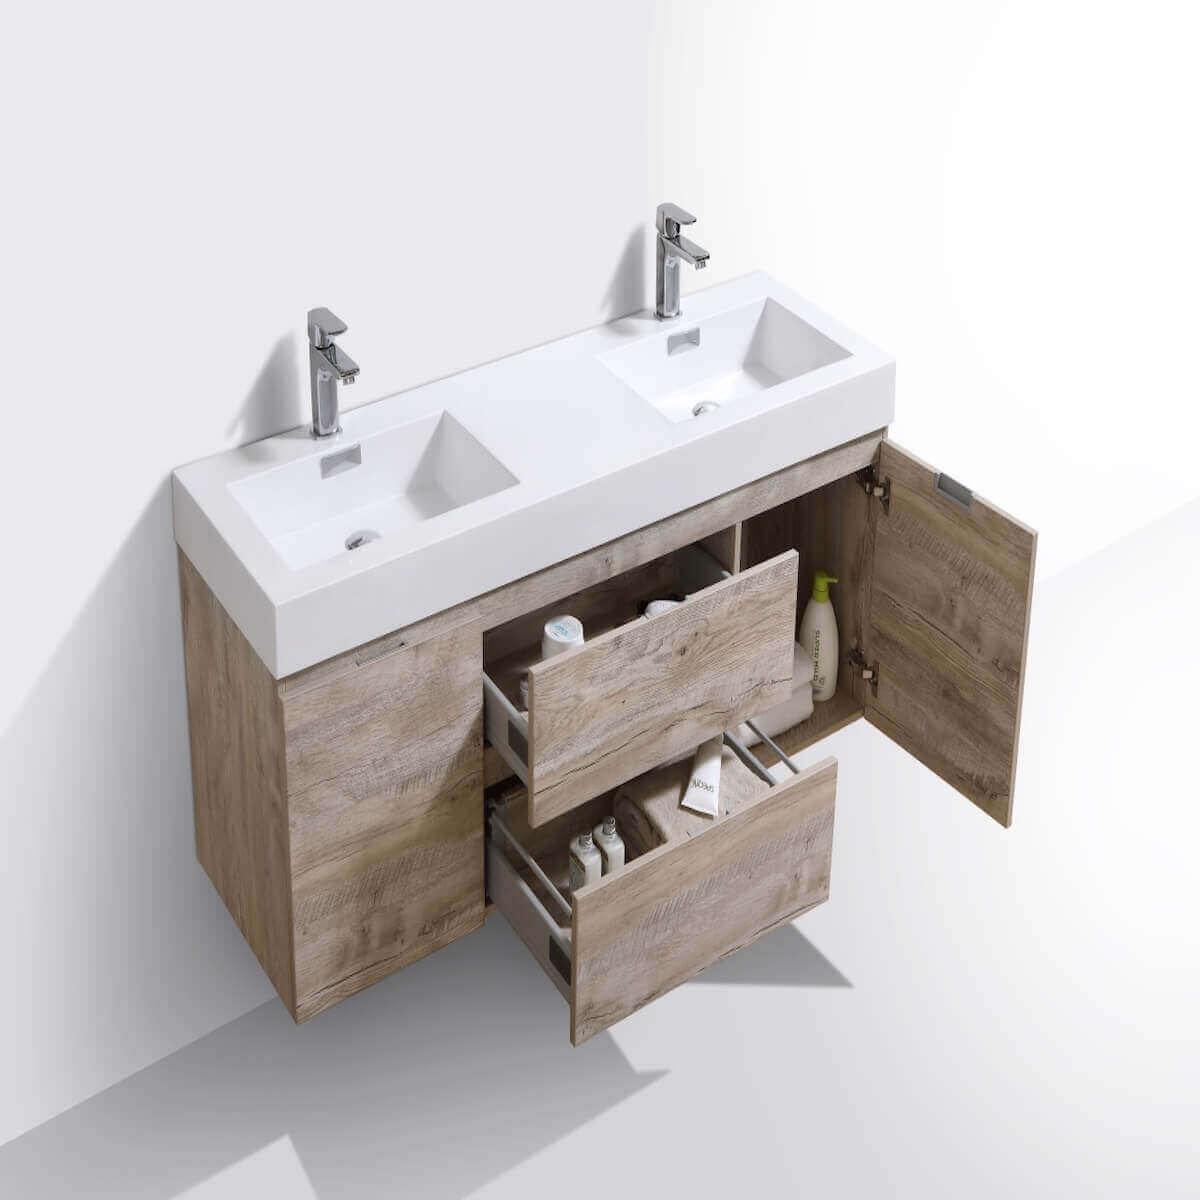 KubeBath Bliss 60" Nature Wood Wall Mount Double Vanity BSL60D-NW Inside #finish_nature wood